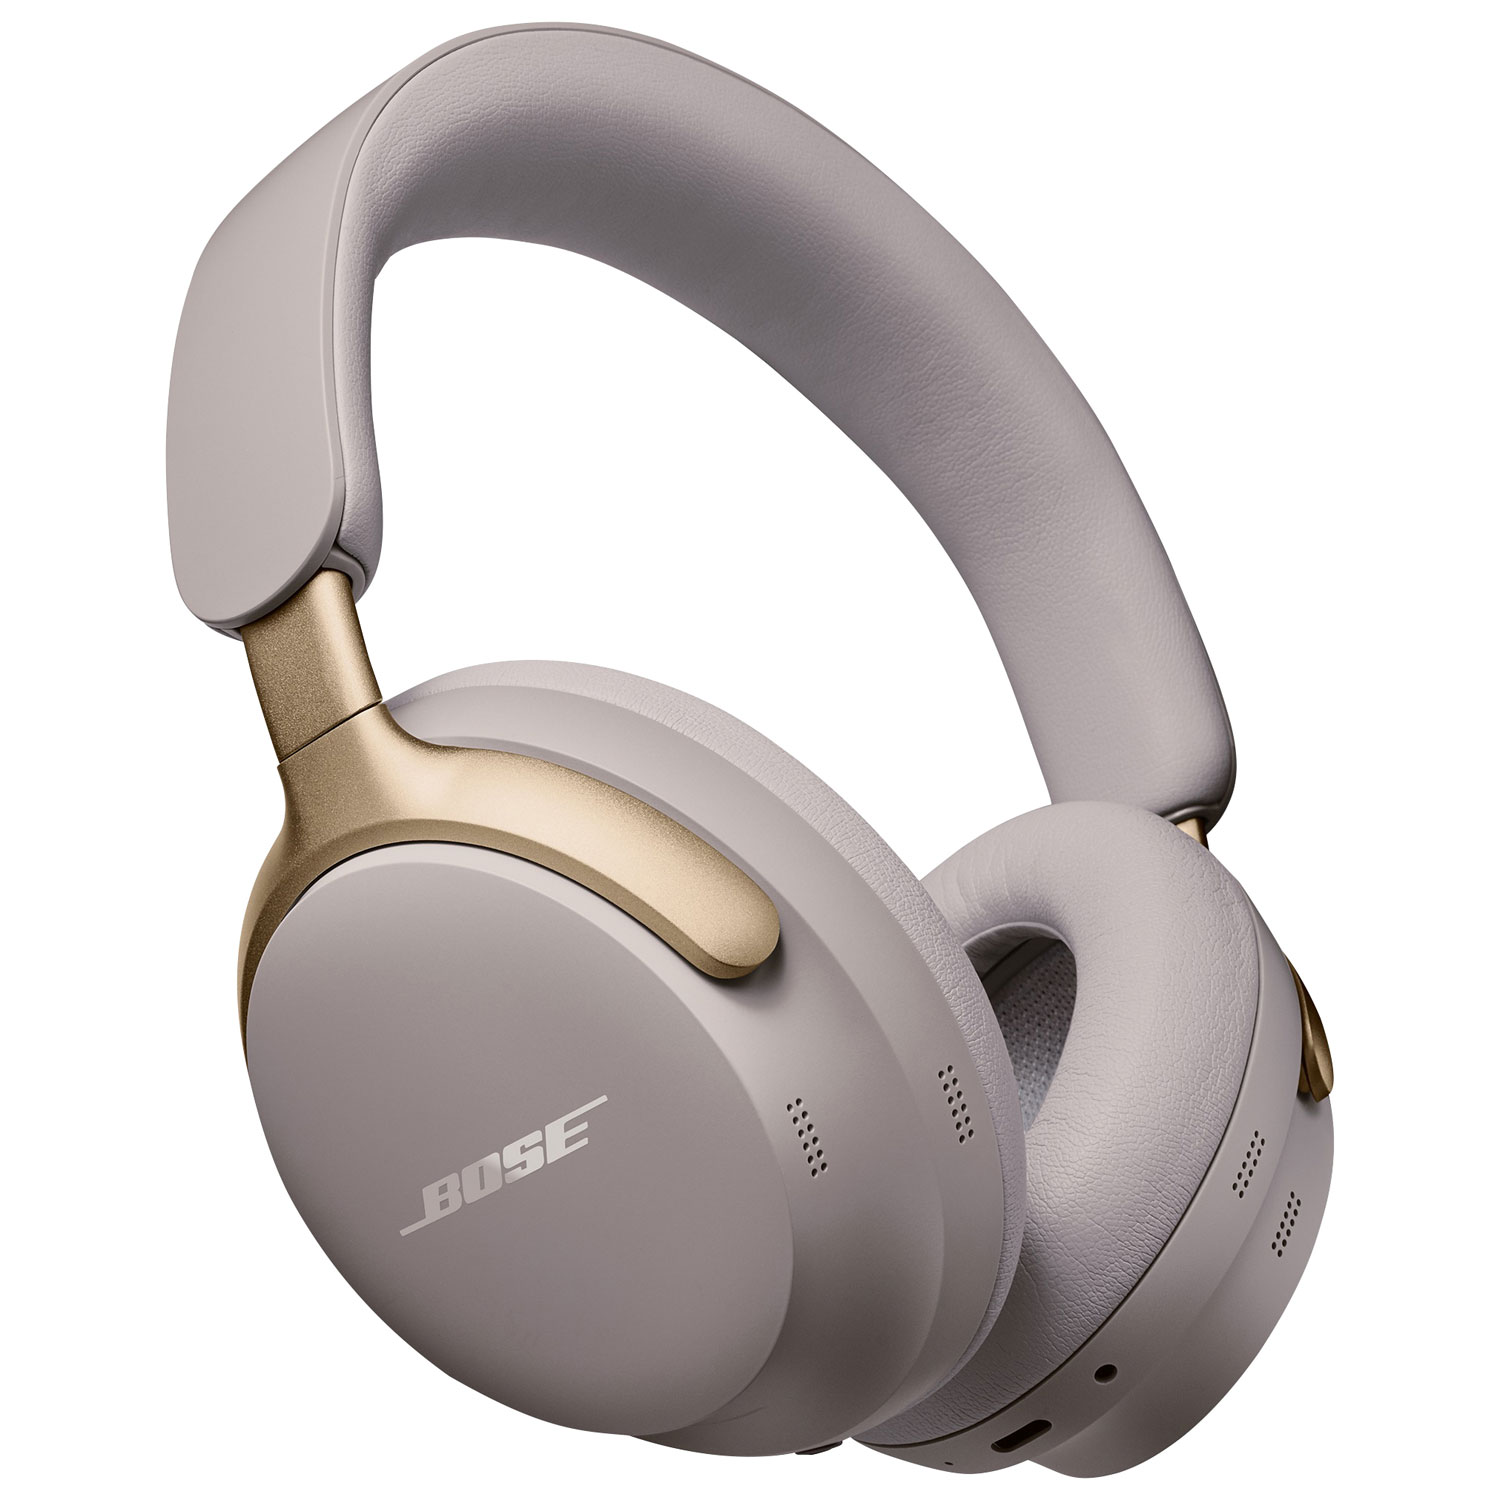 Bose QuietComfort Ultra Over-Ear Noise Cancelling Bluetooth Headphones - Sandstone